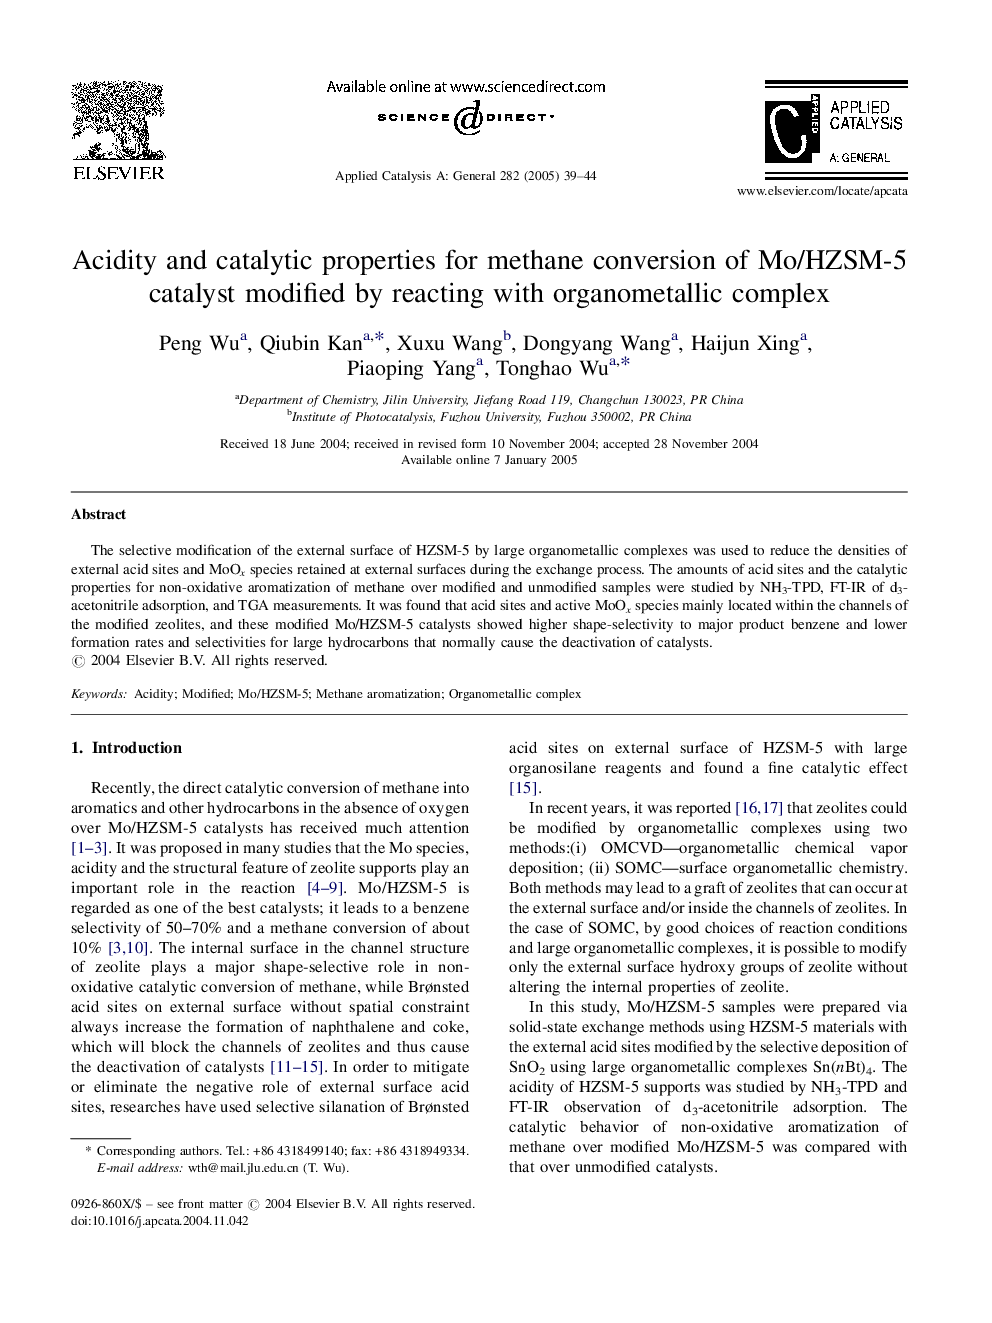 Acidity and catalytic properties for methane conversion of Mo/HZSM-5 catalyst modified by reacting with organometallic complex